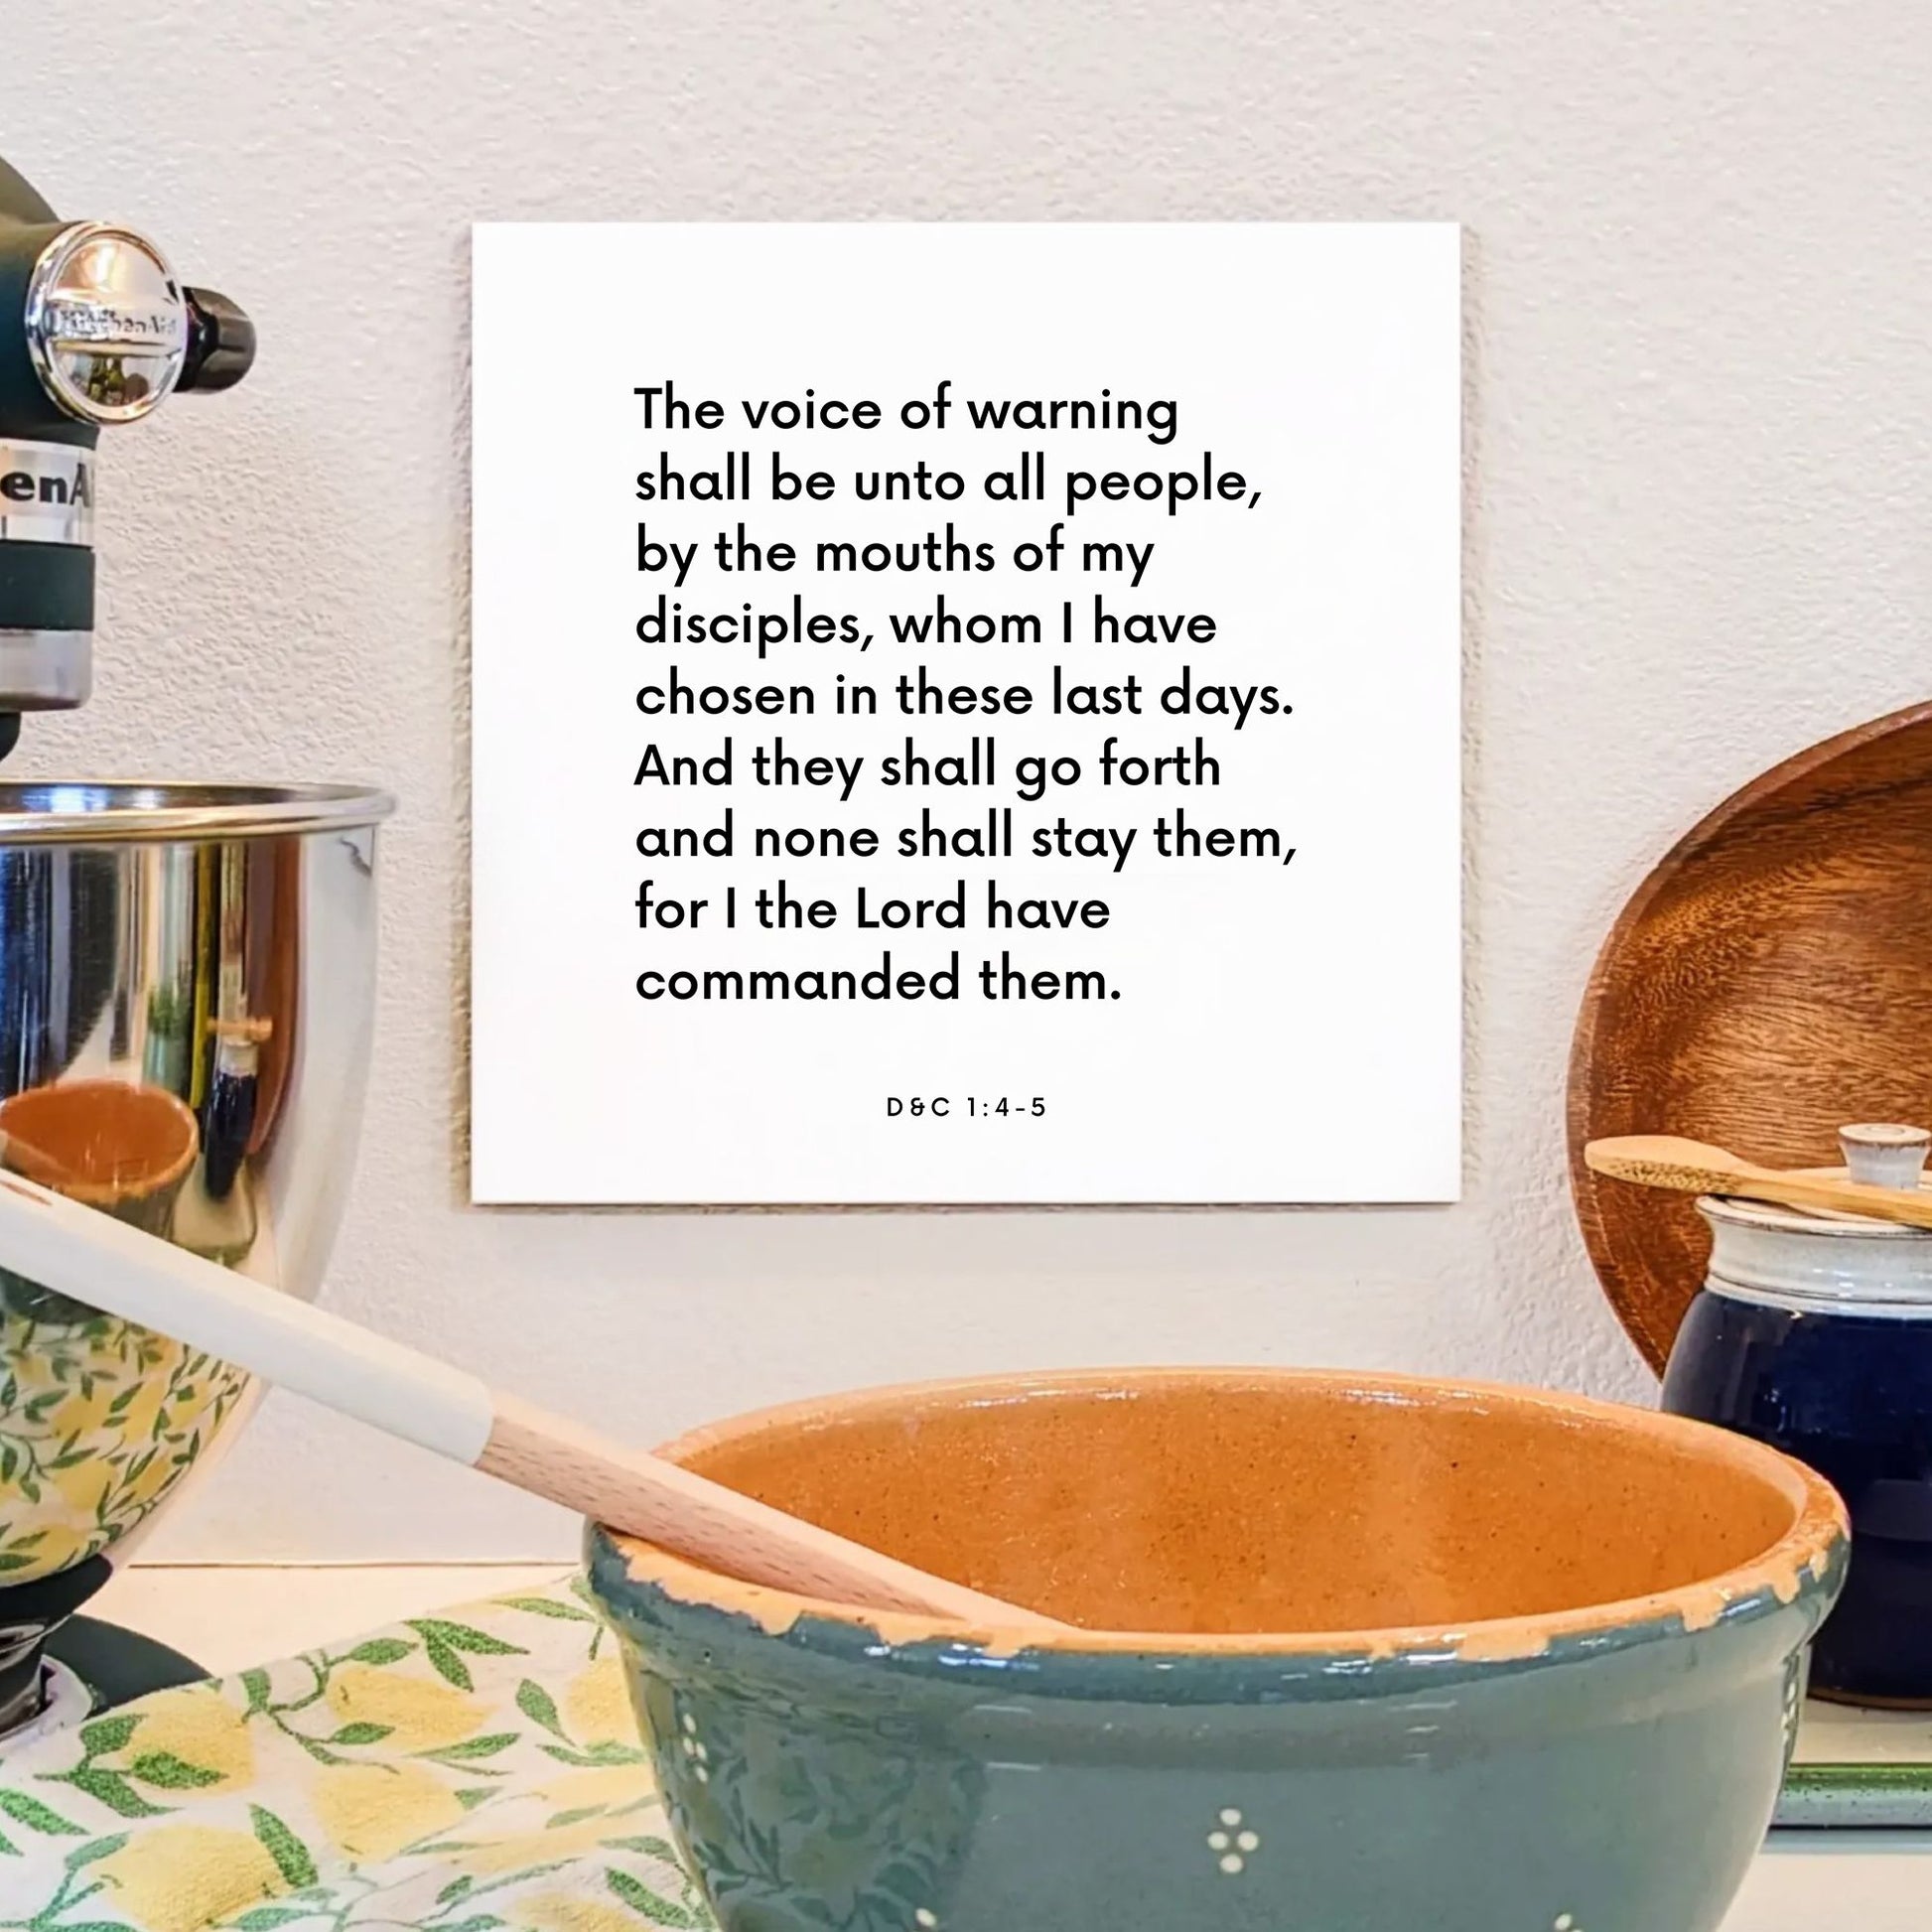 Kitchen mouting of the scripture tile for D&C 1:4-5 - "The voice of warning shall be unto all people"